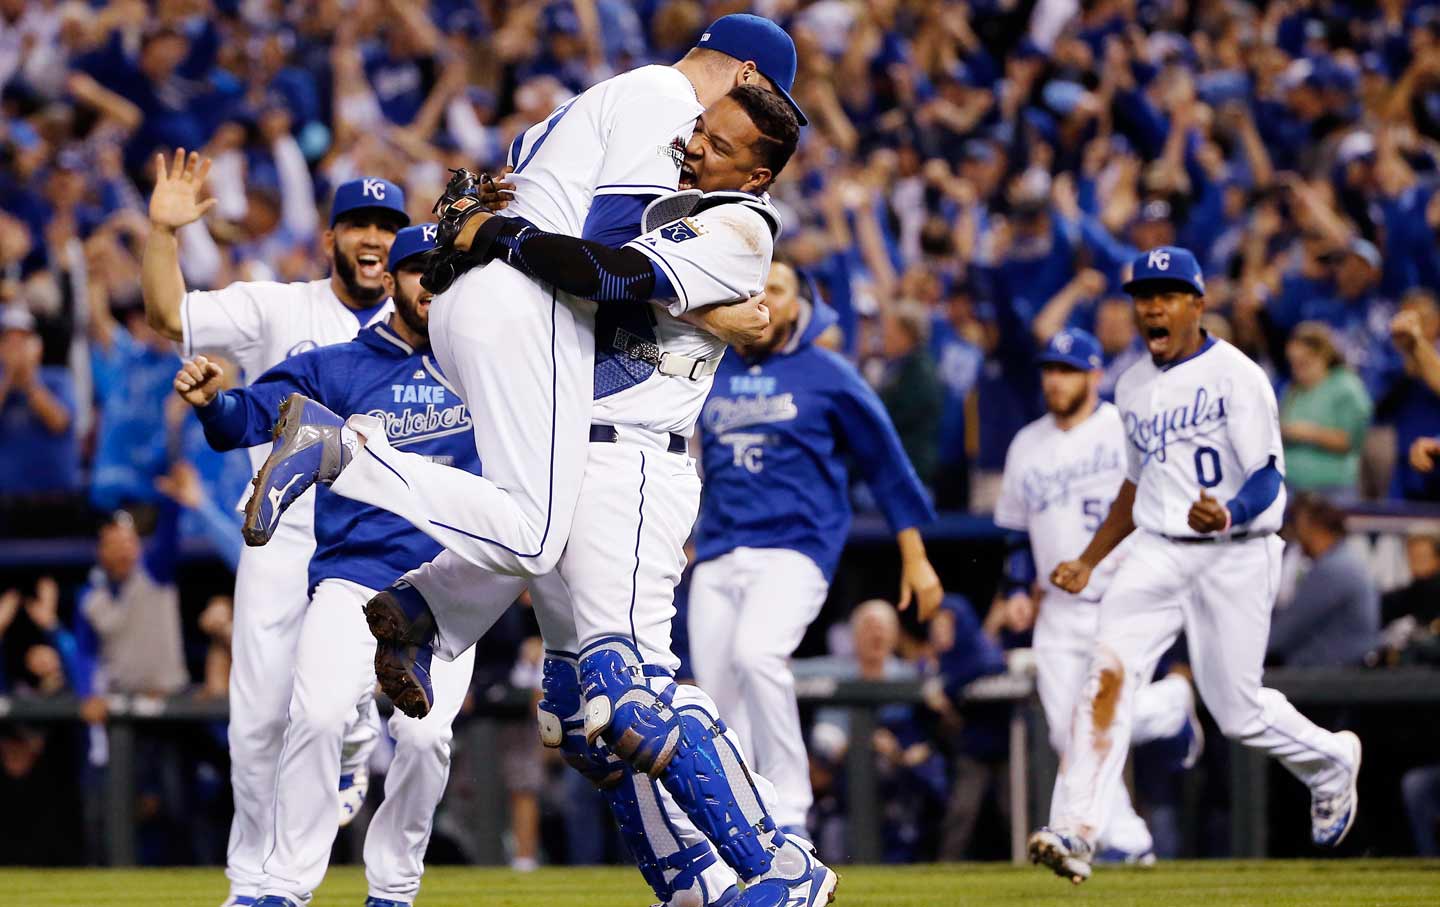 For the First Time in History, the World Series Is Between 2 Teams That Were Never Segregated